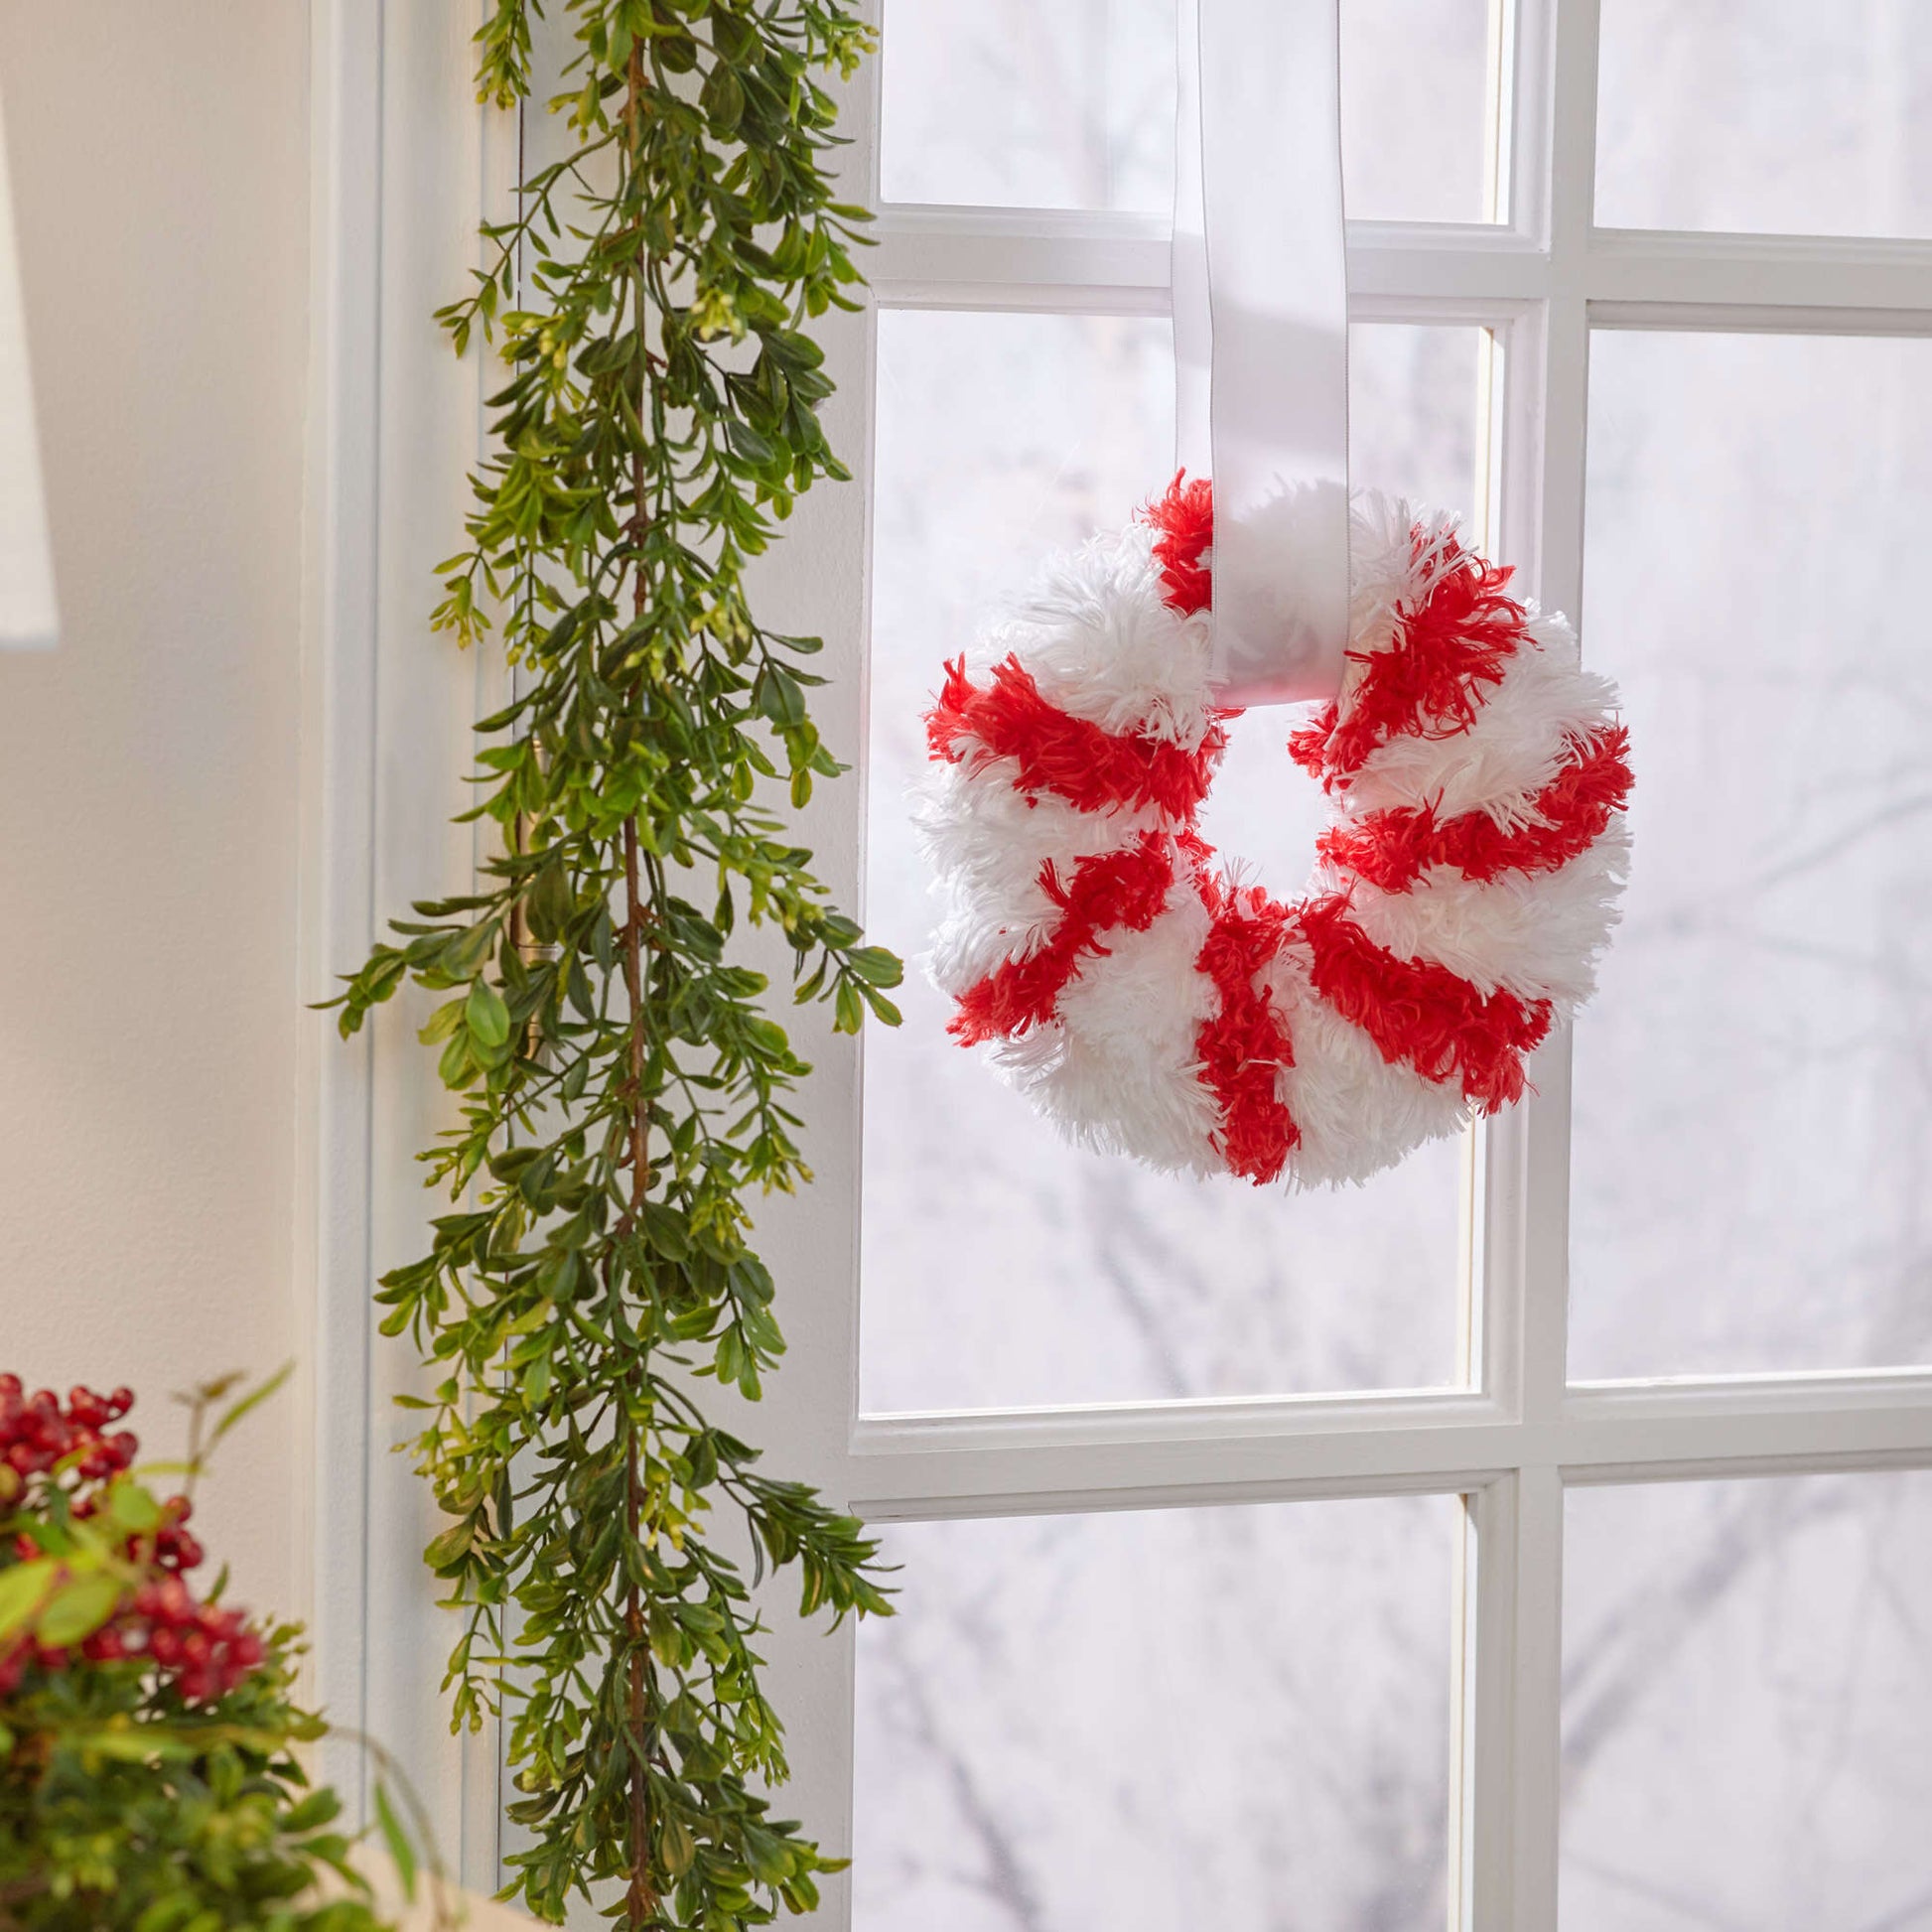 Free Red Heart Craft Peppermint Wreath Pattern